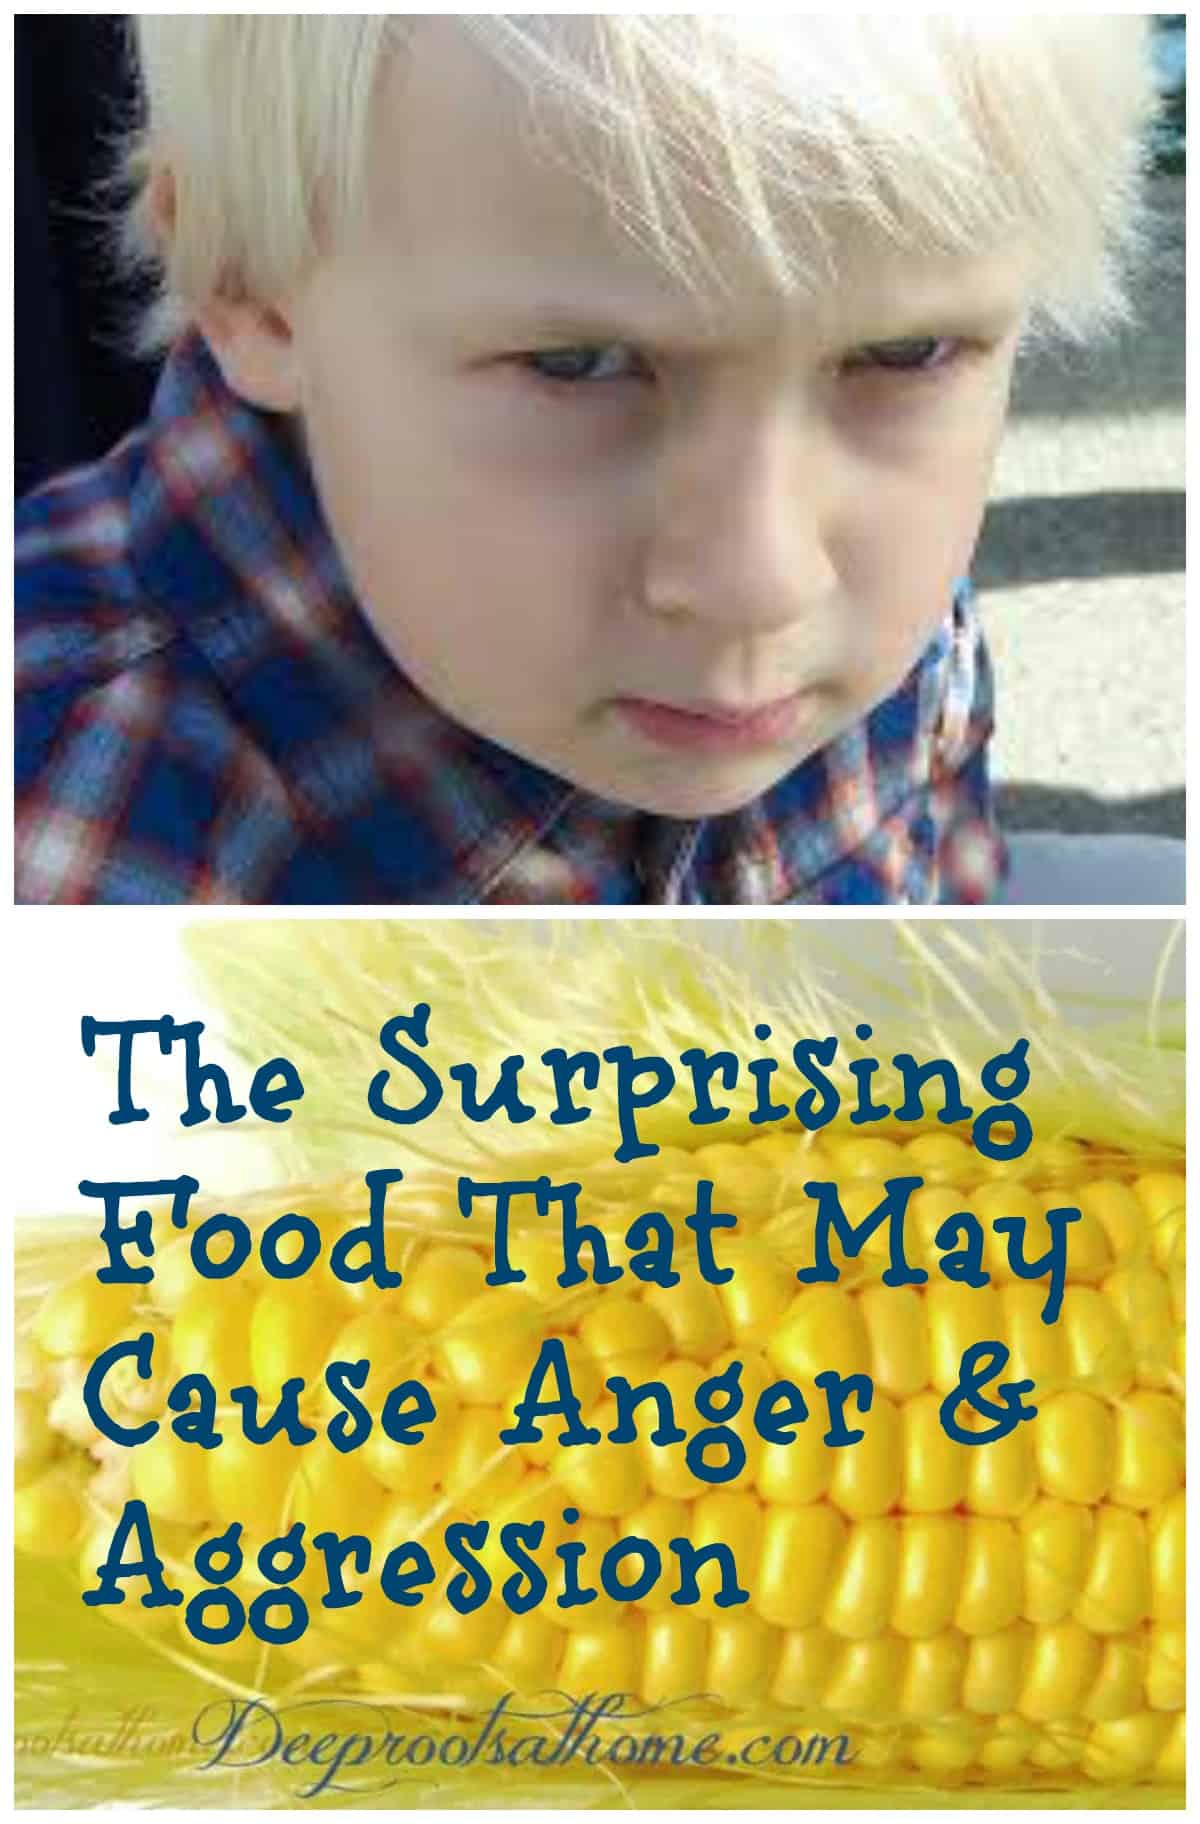 The Surprising Food That May Cause Anger & Aggression. Pinterest image of a very angry, defiant little boy